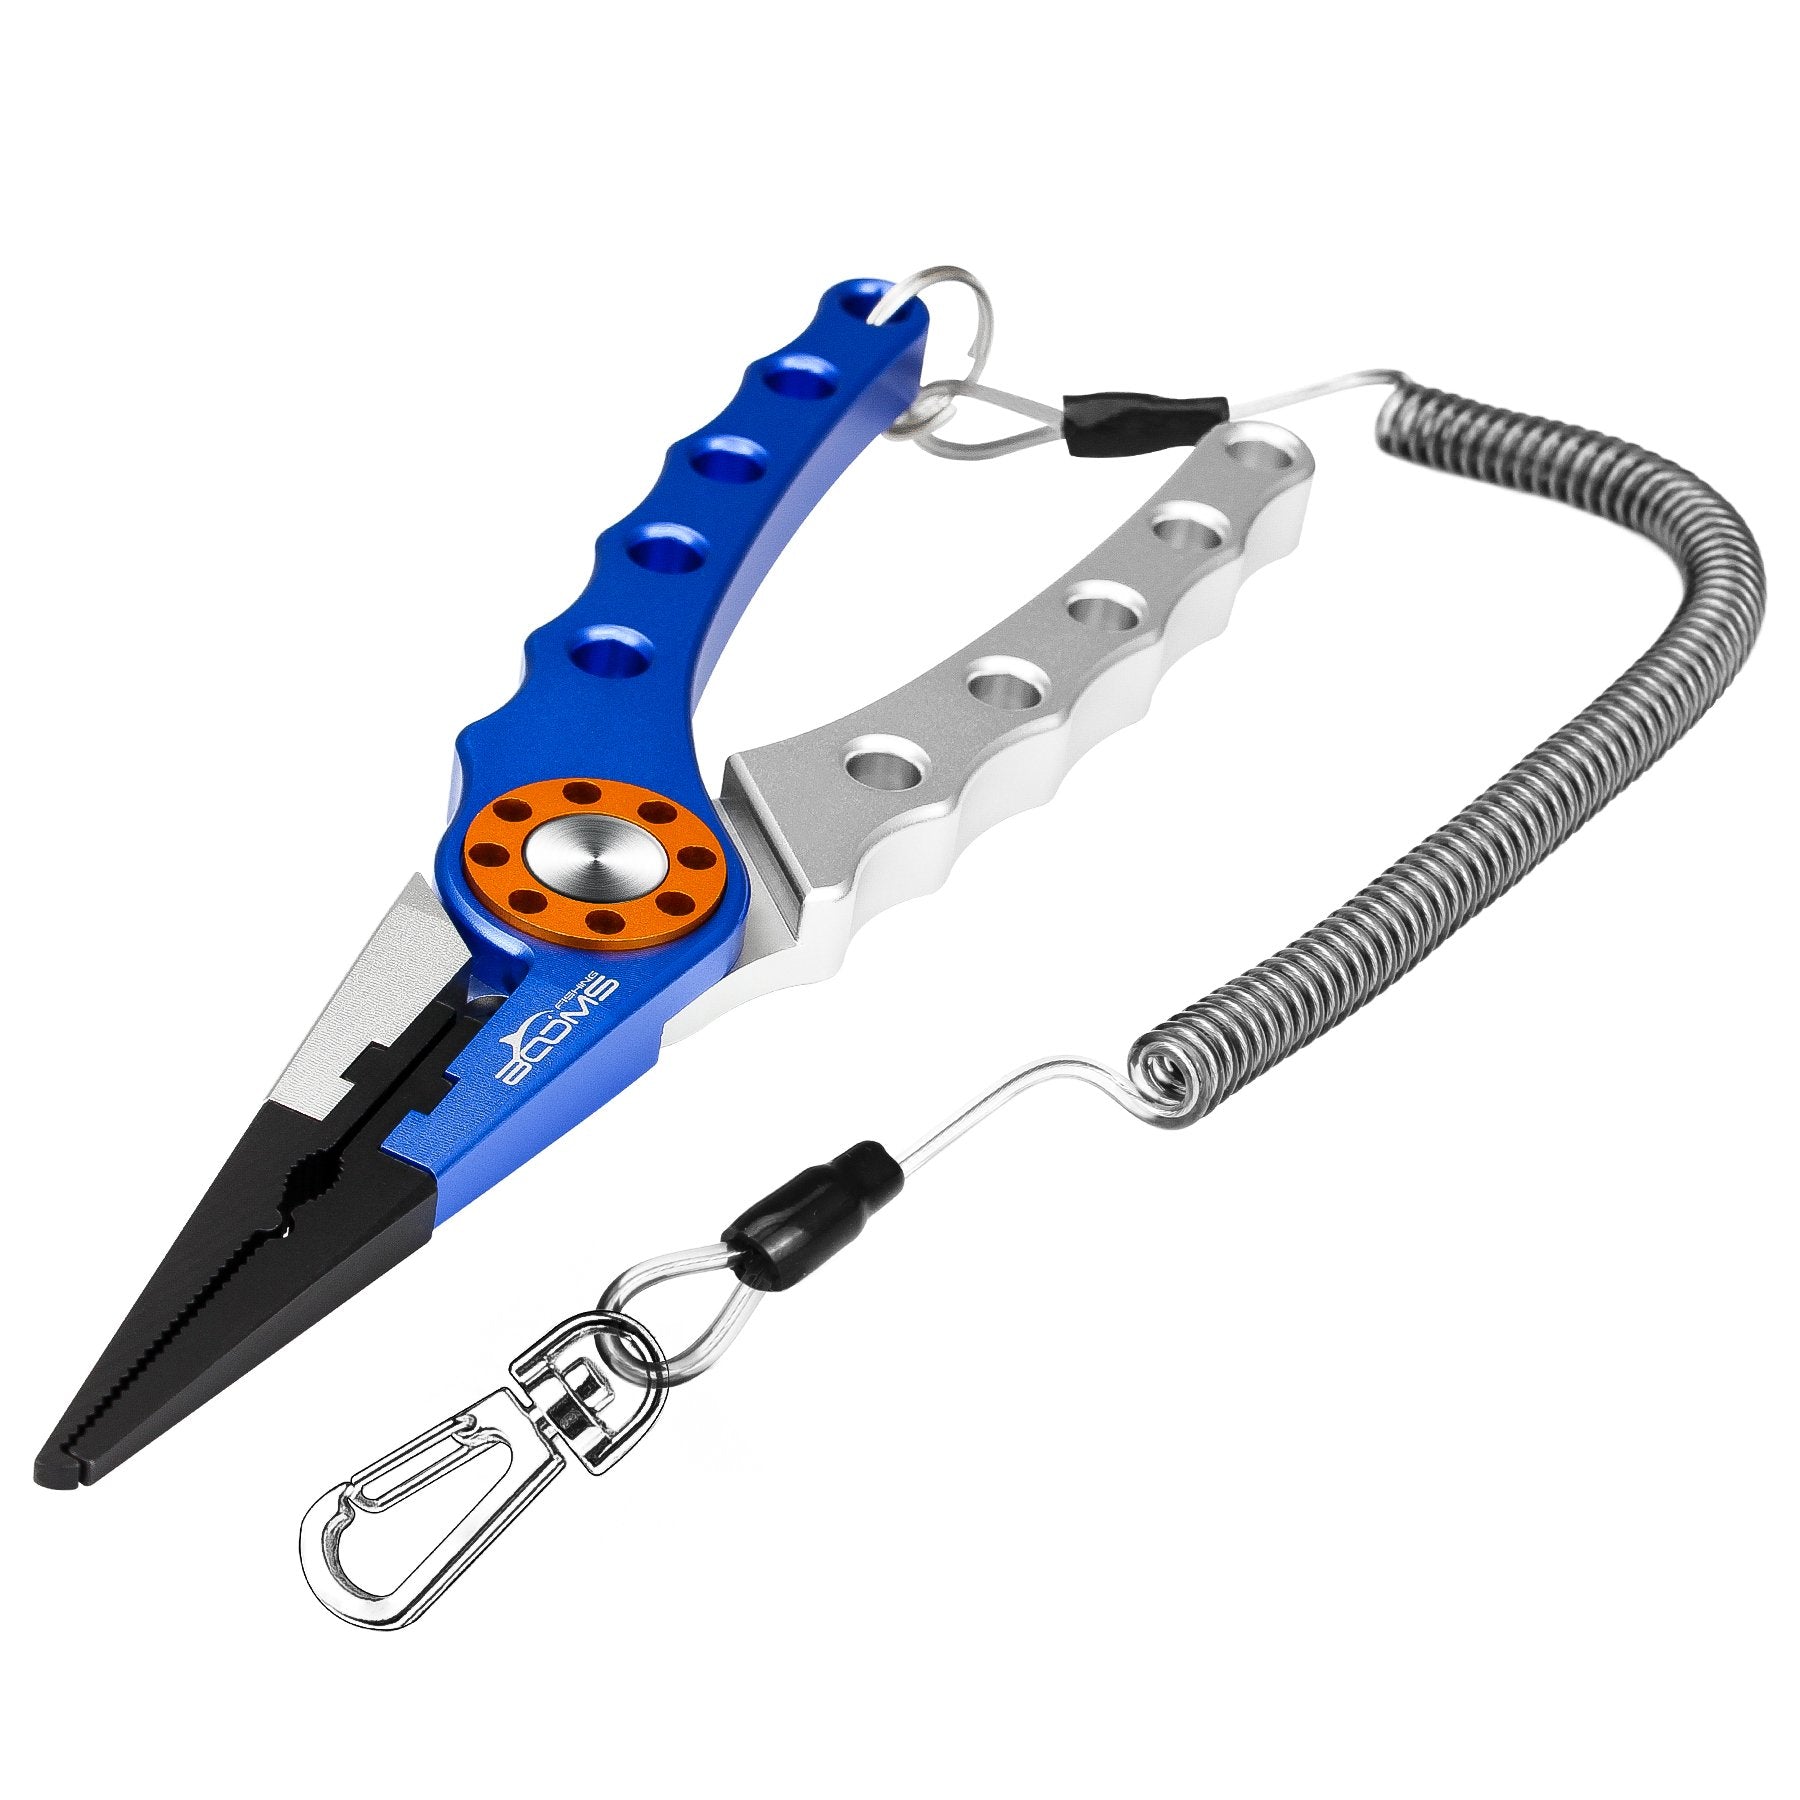  Kraken Bass Fishing Pliers (Fishing Pliers) - Aluminum Braid  Cutters Split Ring Pliers Hook Remover Fish Holder with Sheath and Lanyard  : Sports & Outdoors